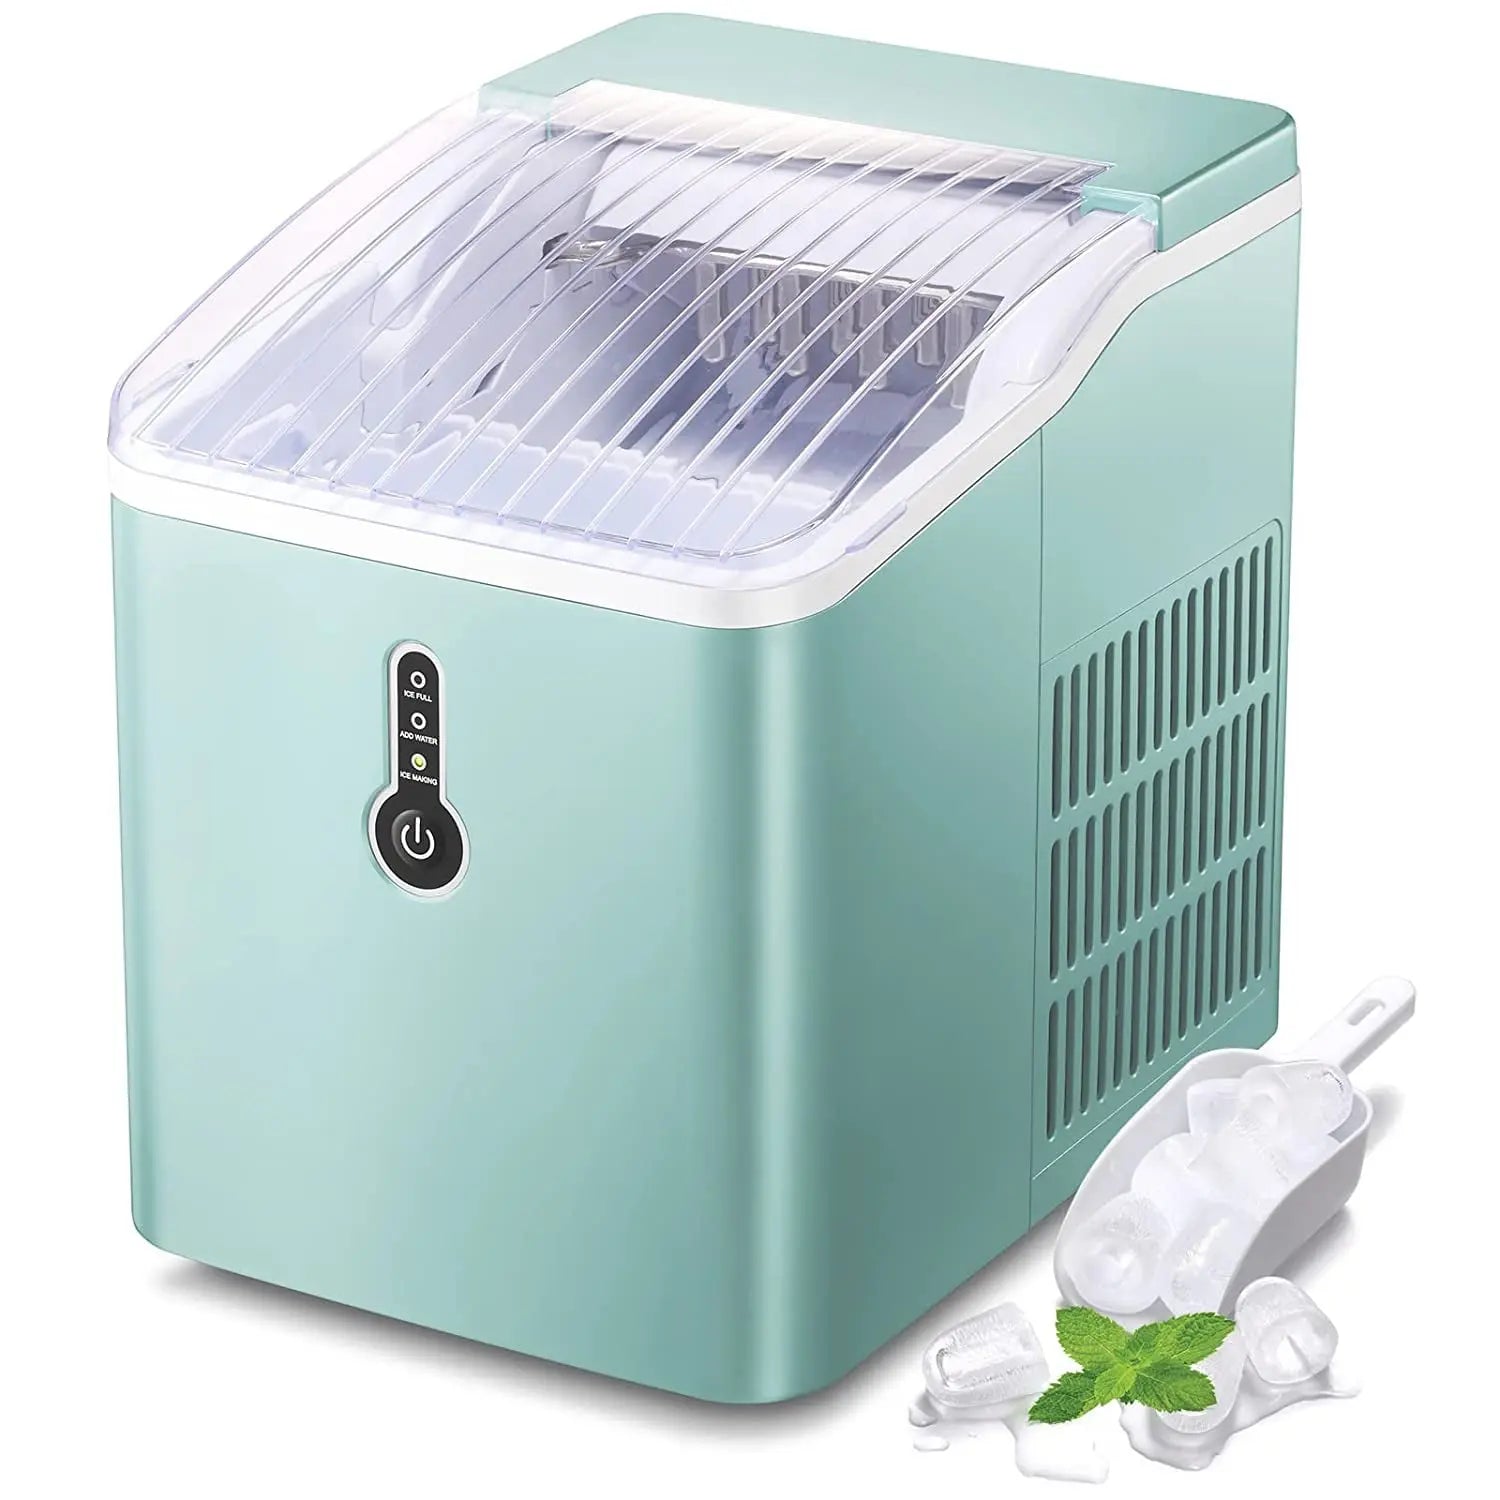 AGLUCKY Countertop Ice Maker Machine, Portable Compact Ice Cube Maker with Ice Scoop & Basket, 26Lbs/24H Ice Machine for Home/Kitchen/Office/Bar, Green